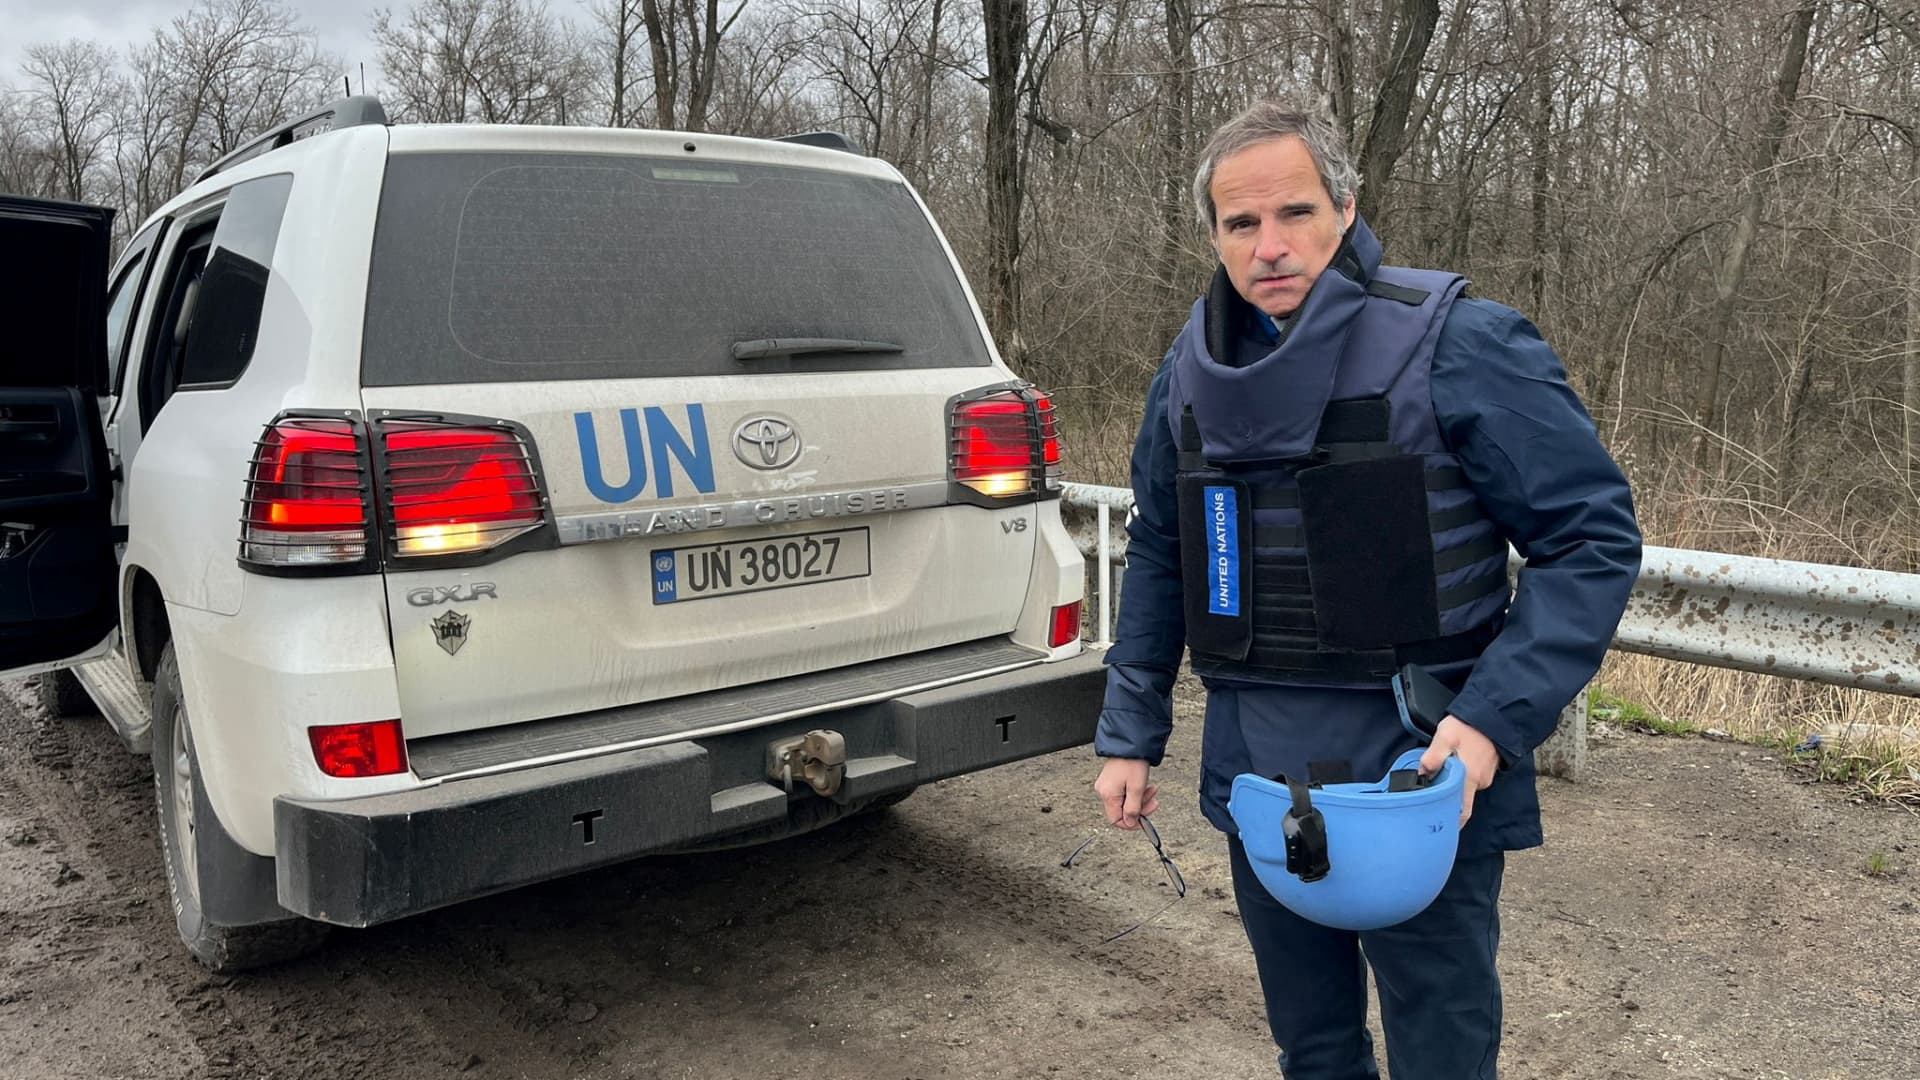 International Atomic Energy Agency (IAEA) Director General Rafael Grossi is seen on his way to Zaporizhzhia Nuclear Power Plant, amid Russia's attack on Ukraine, in Zaporizhzhia region, Ukraine March 29, 2023. 